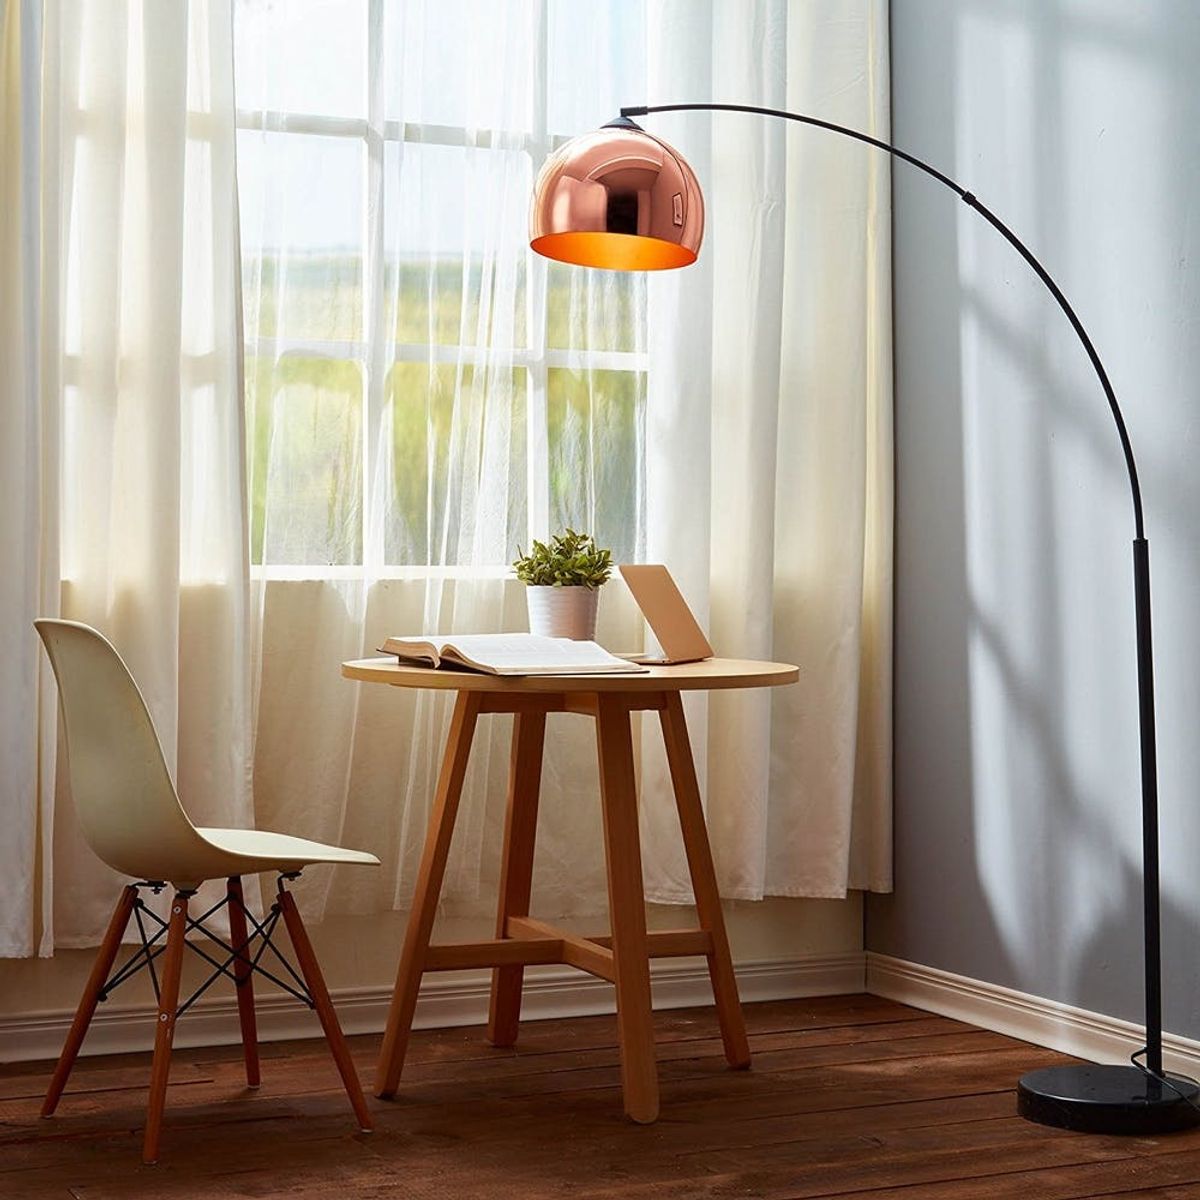 12 Stylish Floor Lamps You Can Buy on Amazon Right Now